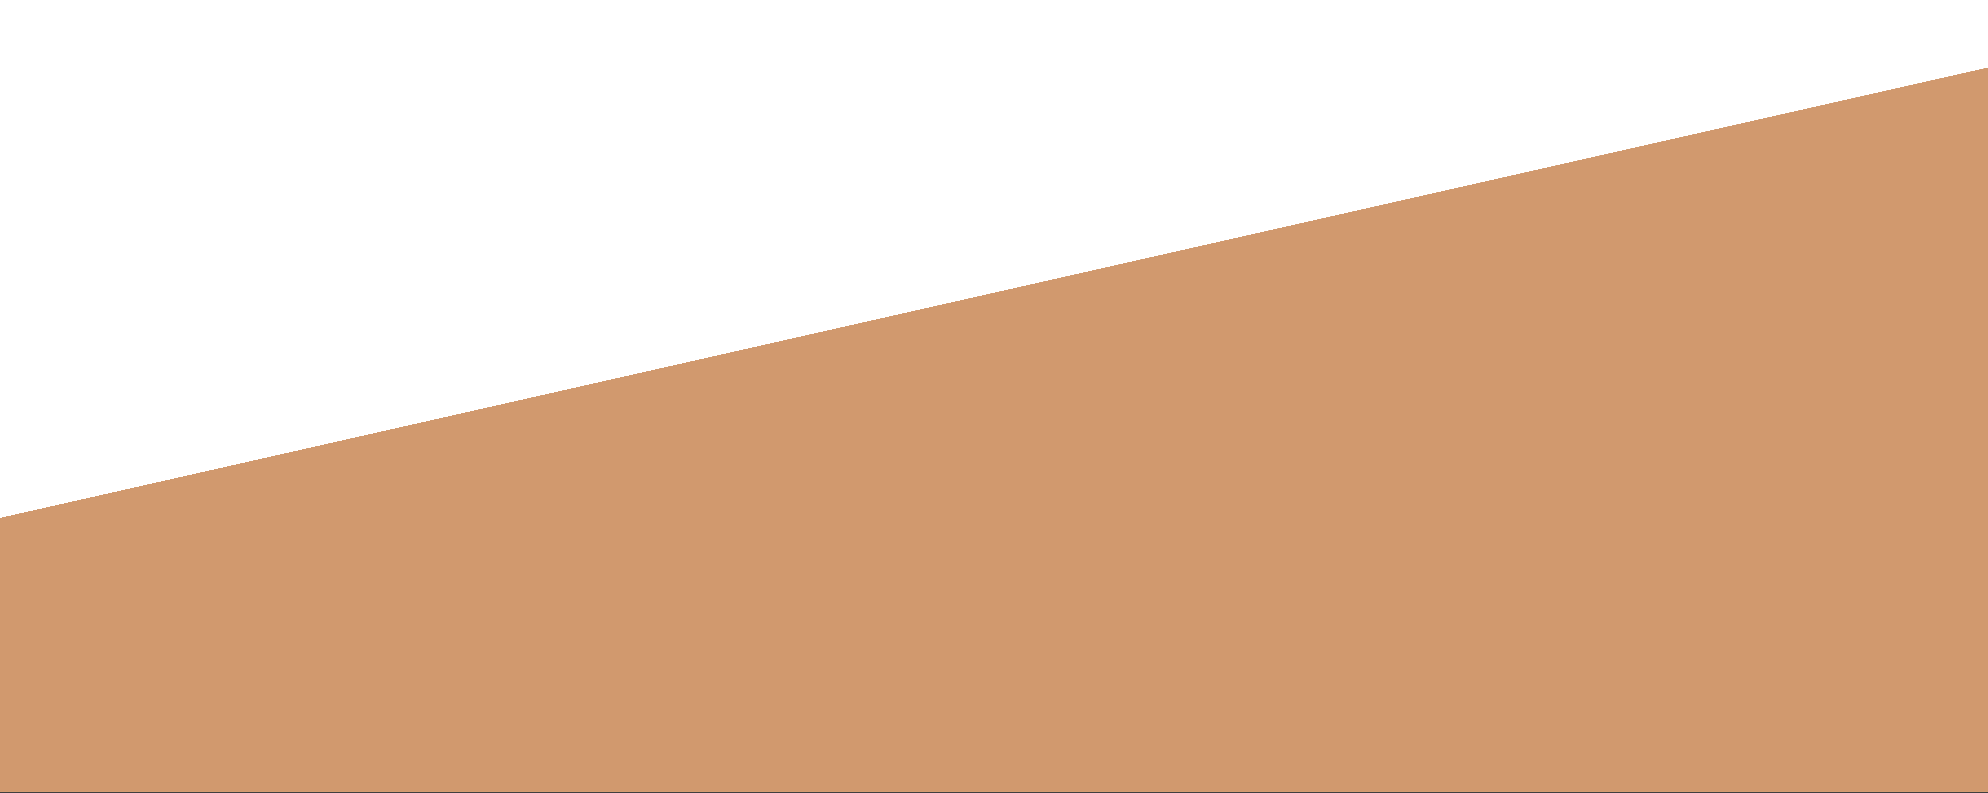 background-color brown